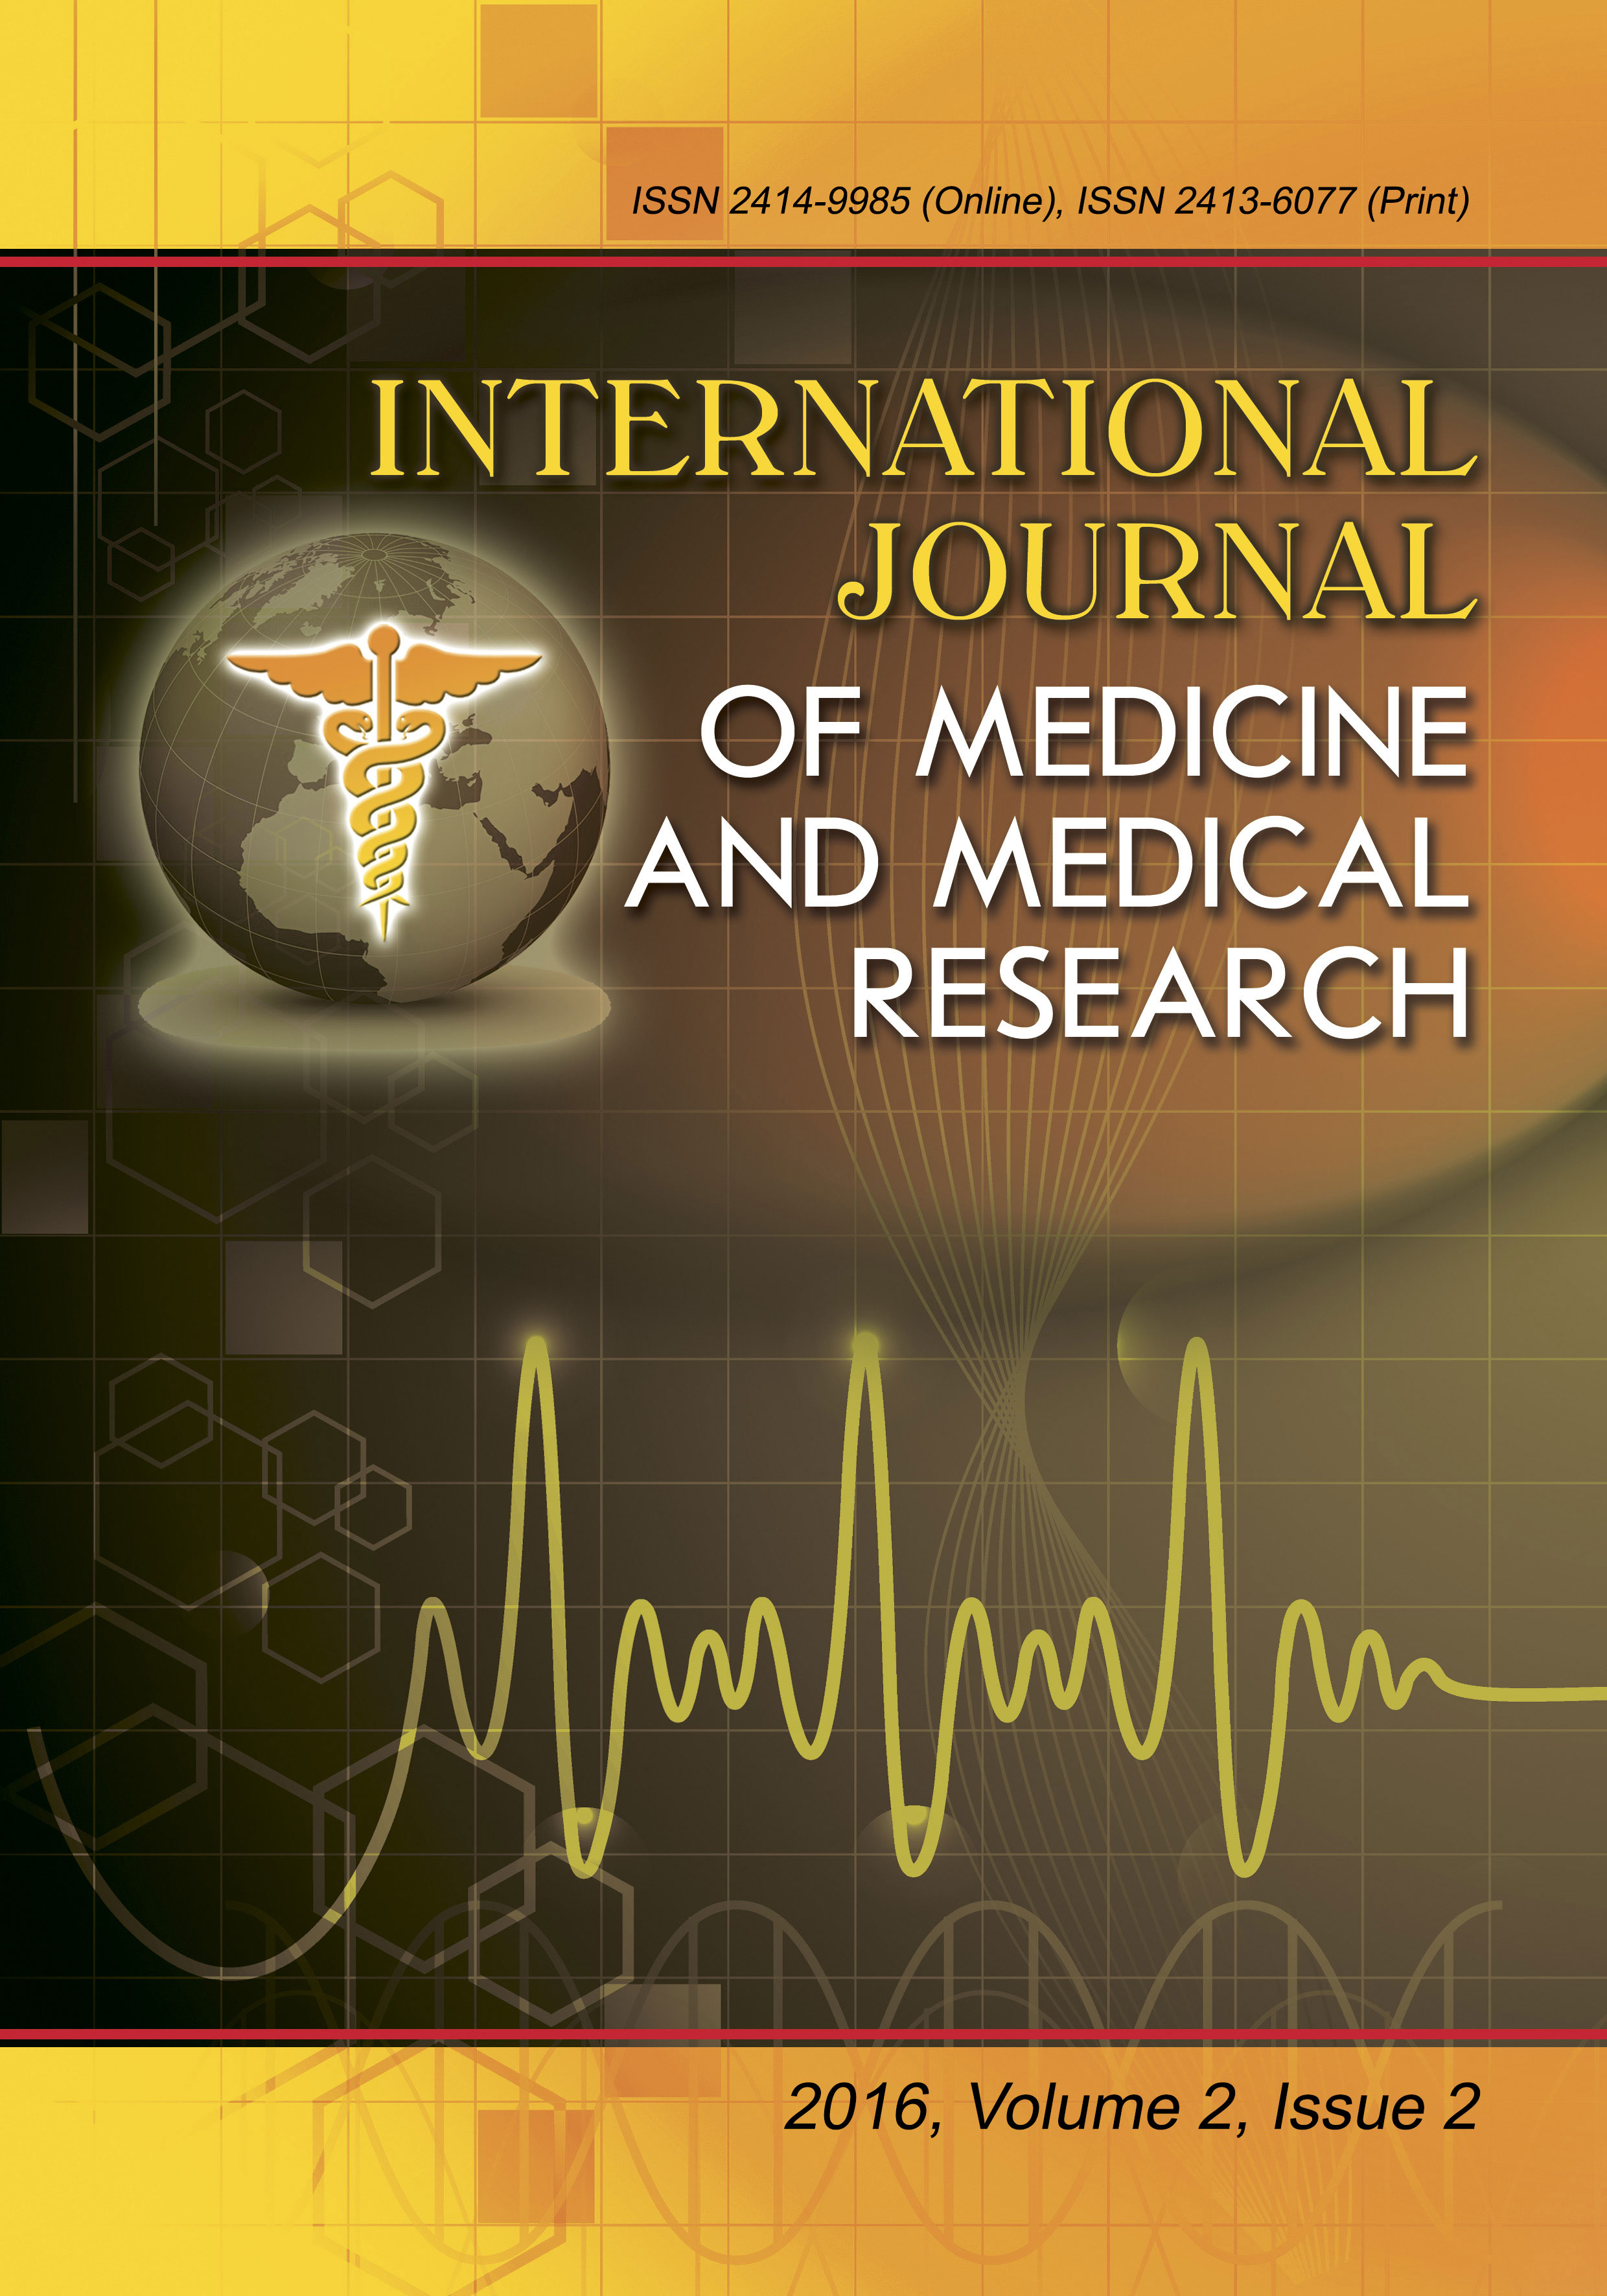 					View Vol. 2 No. 2 (2016): International Journal of Medicine and Medical Research
				